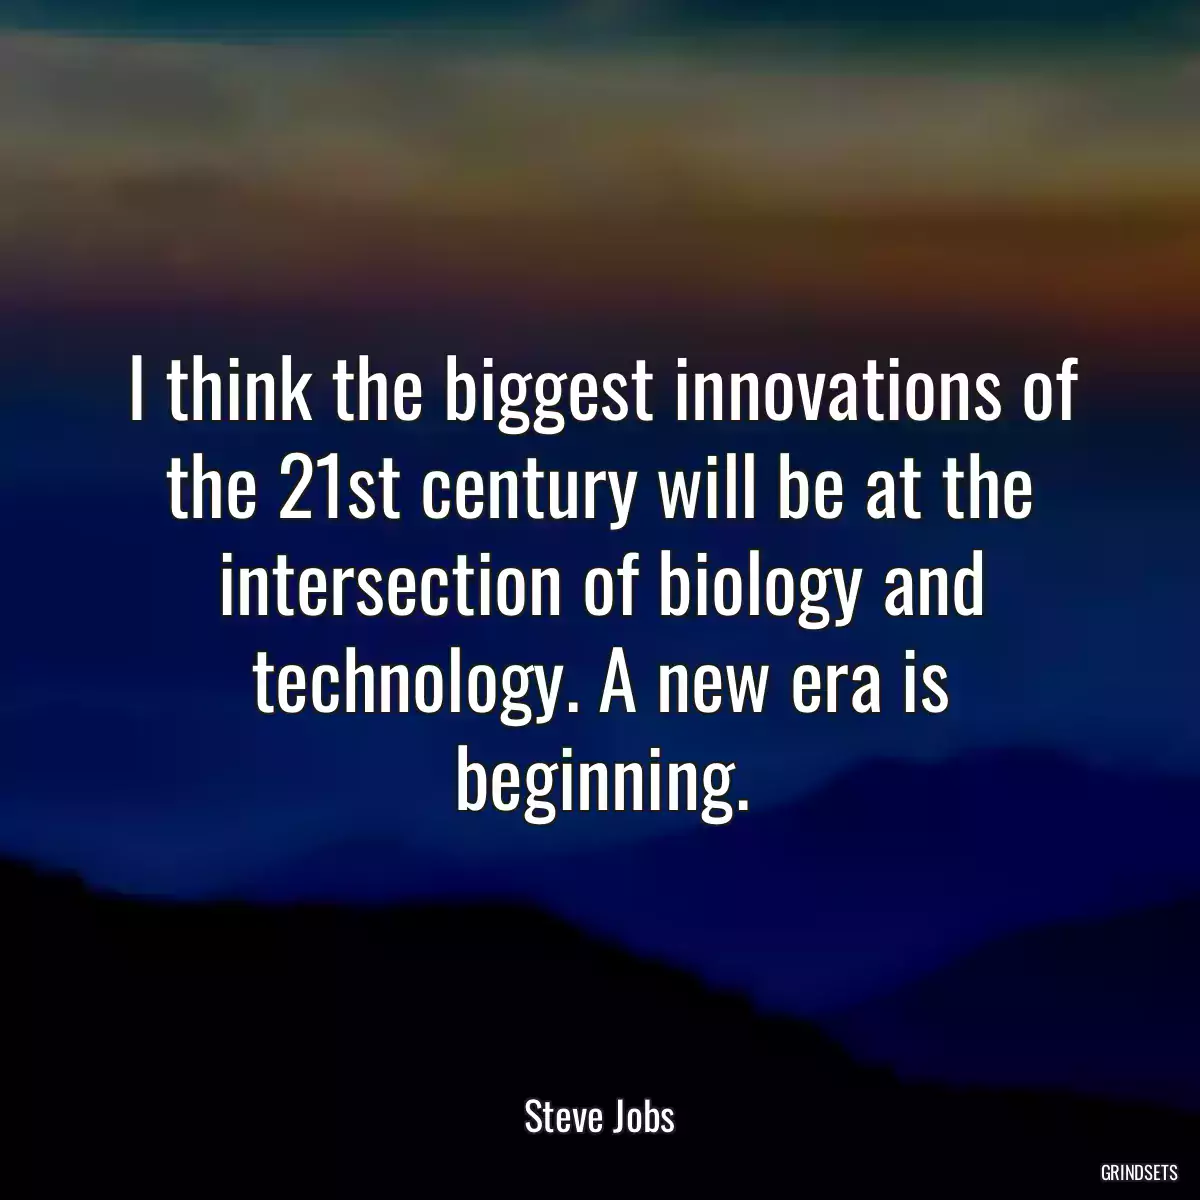 I think the biggest innovations of the 21st century will be at the intersection of biology and technology. A new era is beginning.